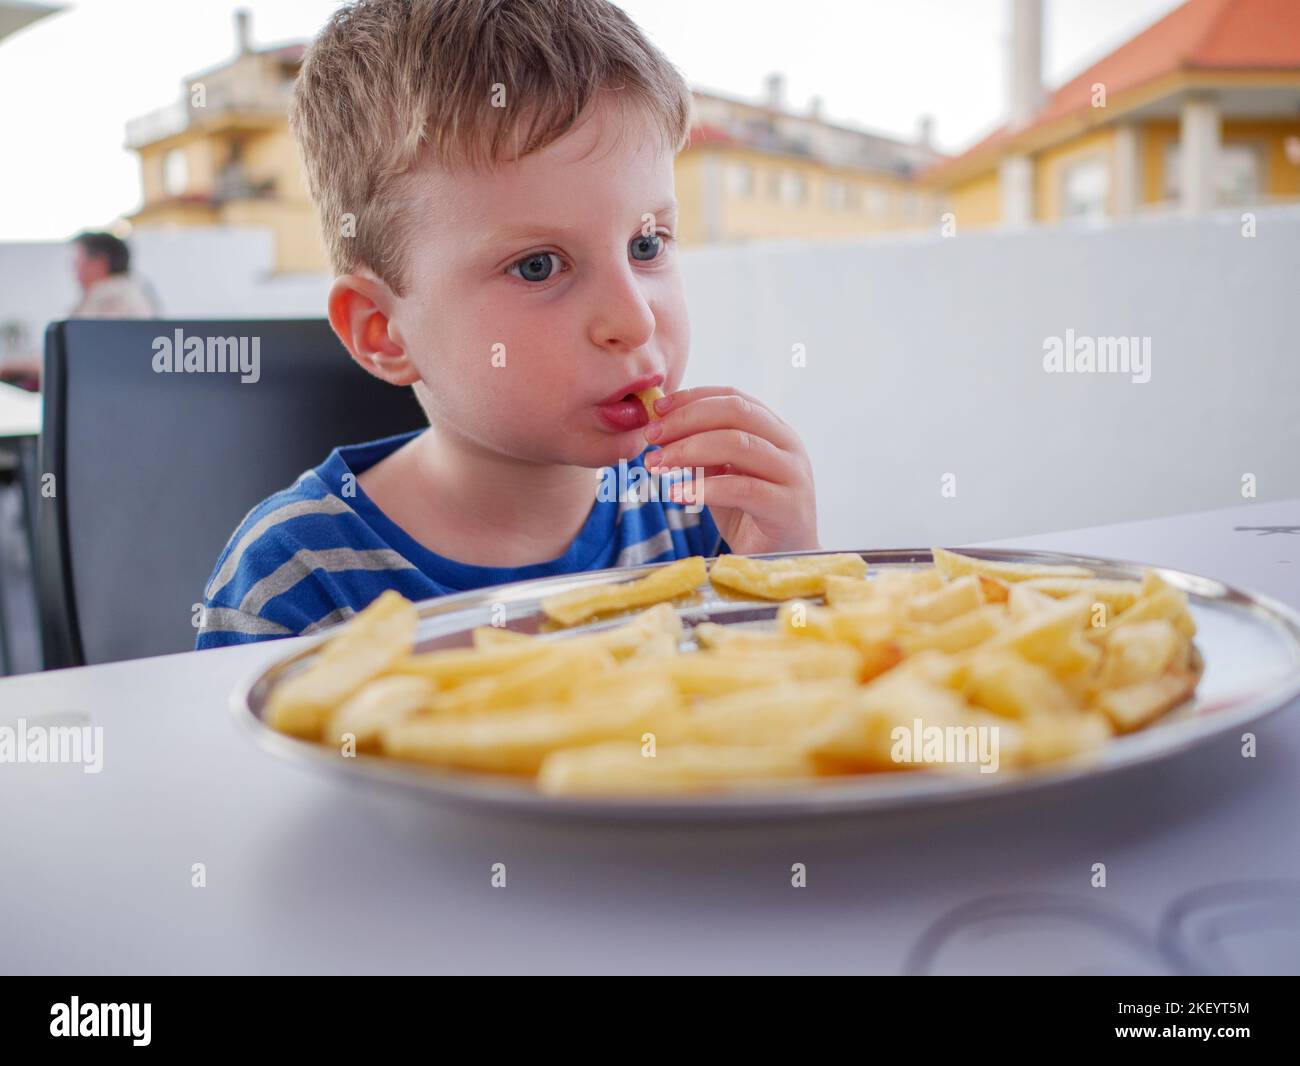 Young three year old boy eating fried chips Stock Photo